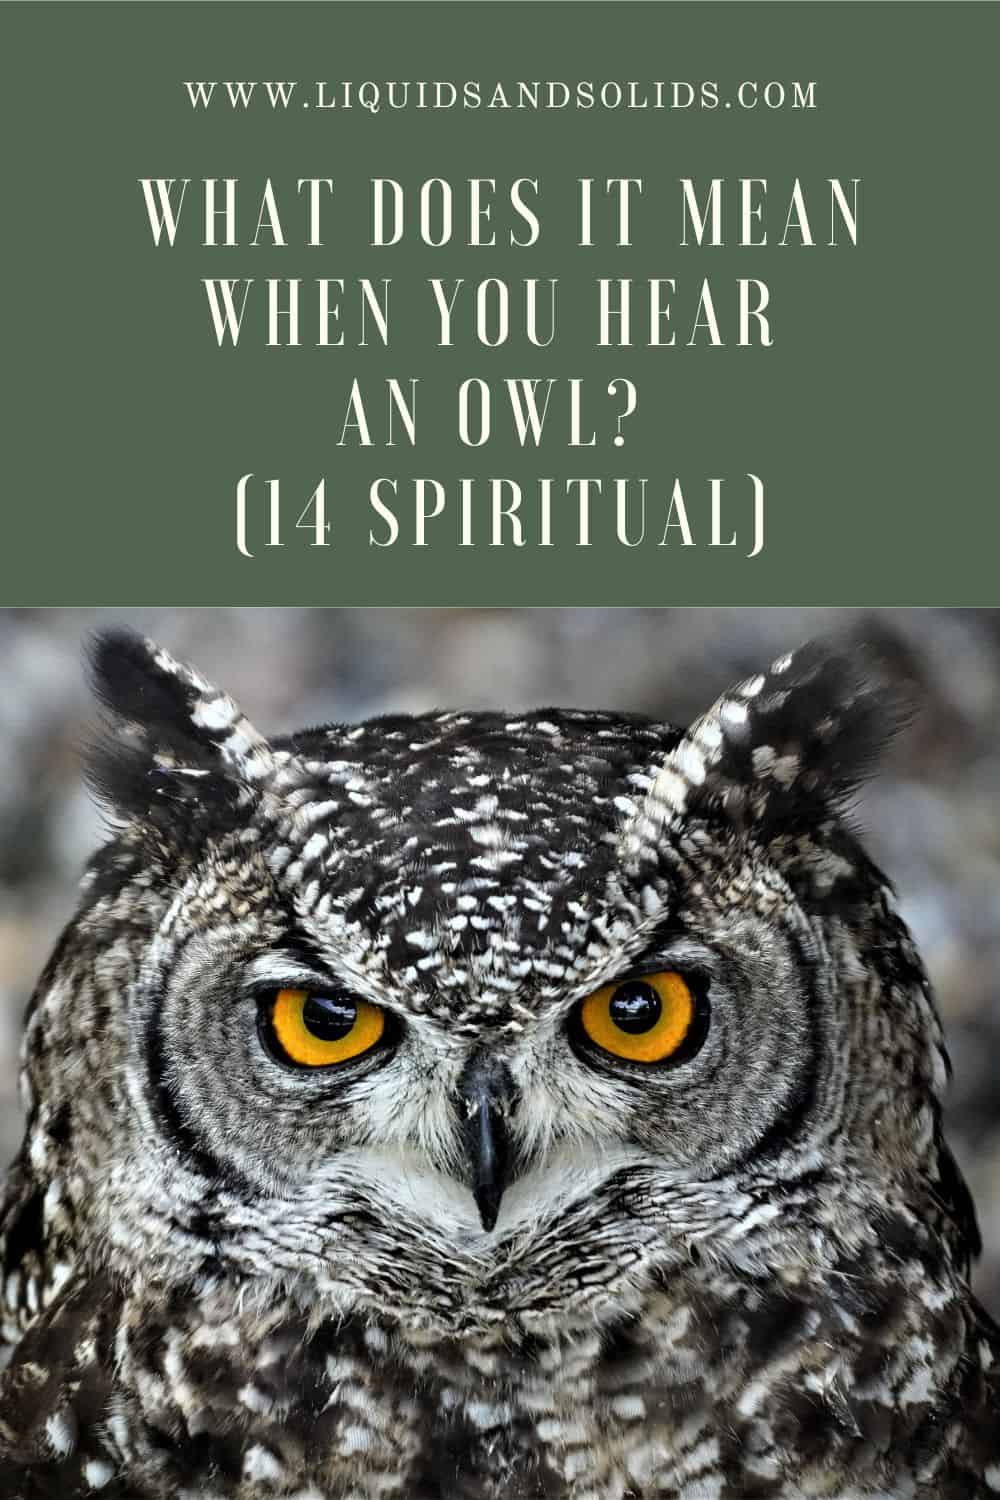 What Does it Mean When You Hear an Owl?